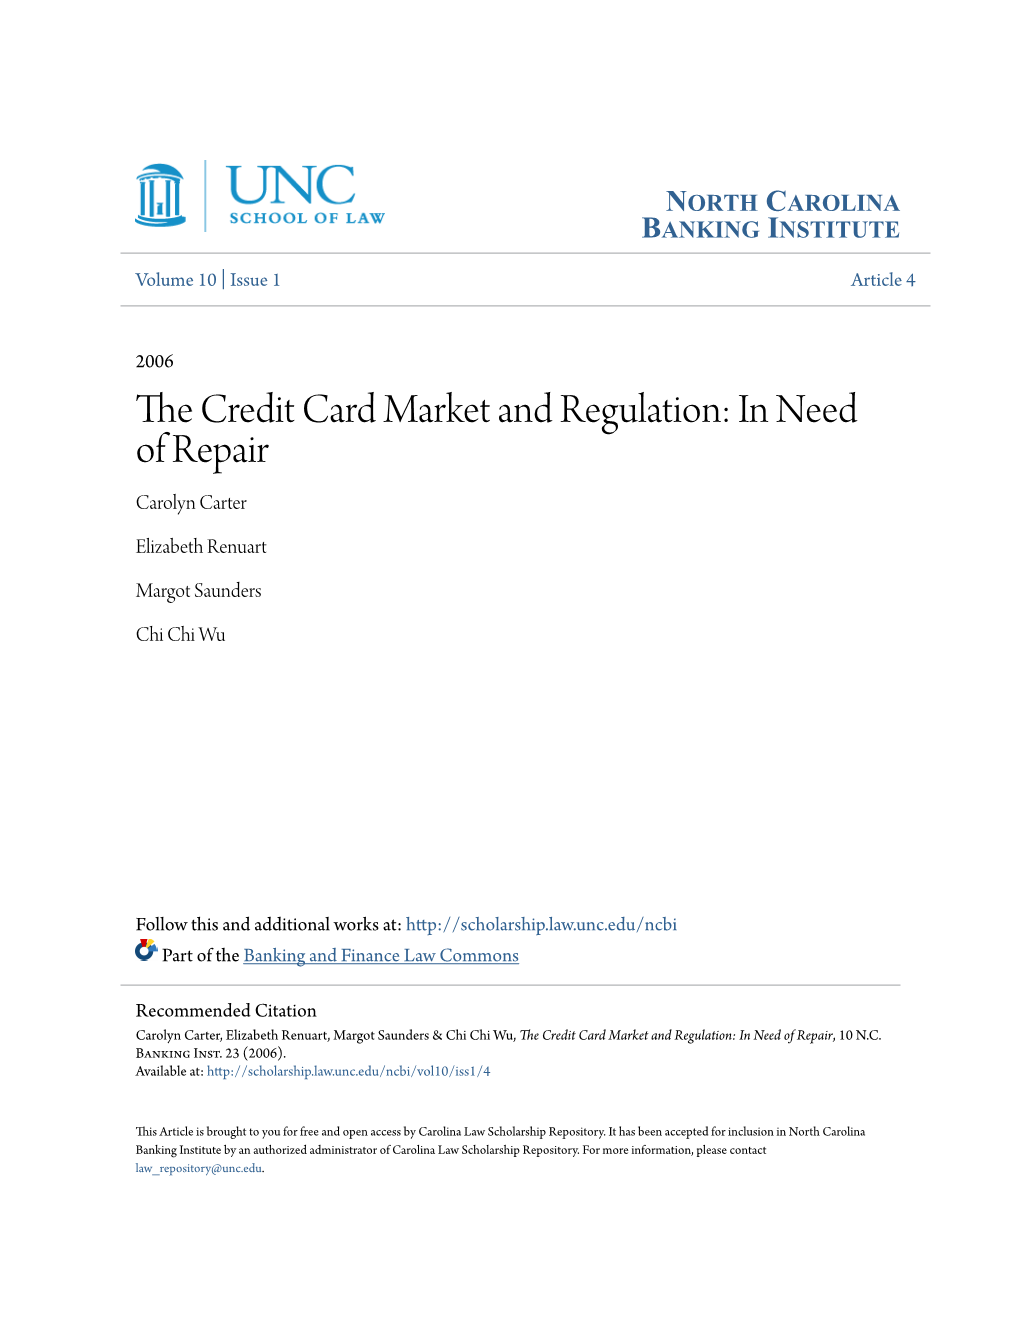 The Credit Card Market and Regulation: in Need of Repair, 10 N.C